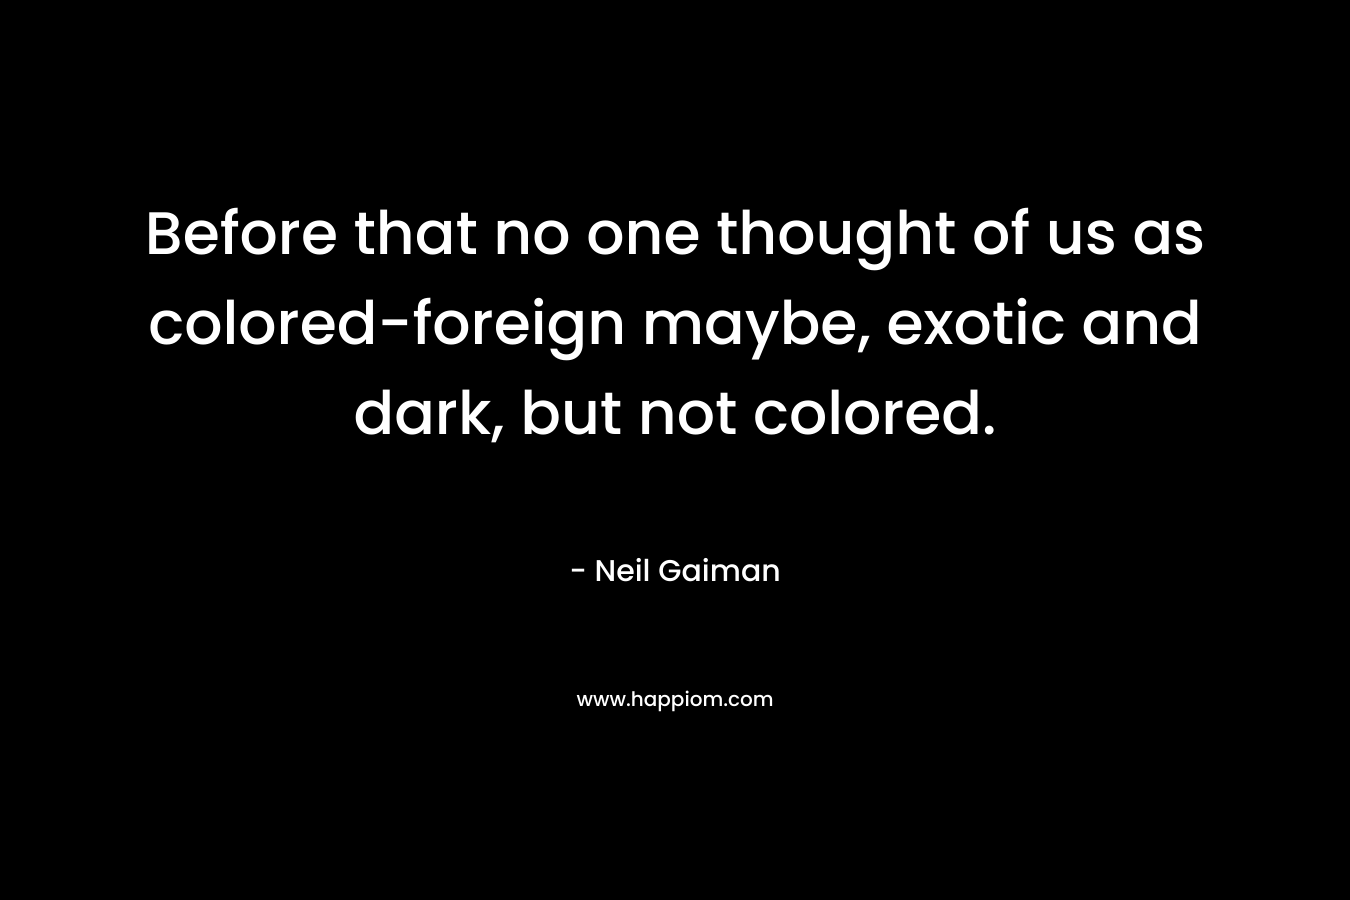 Before that no one thought of us as colored-foreign maybe, exotic and dark, but not colored.